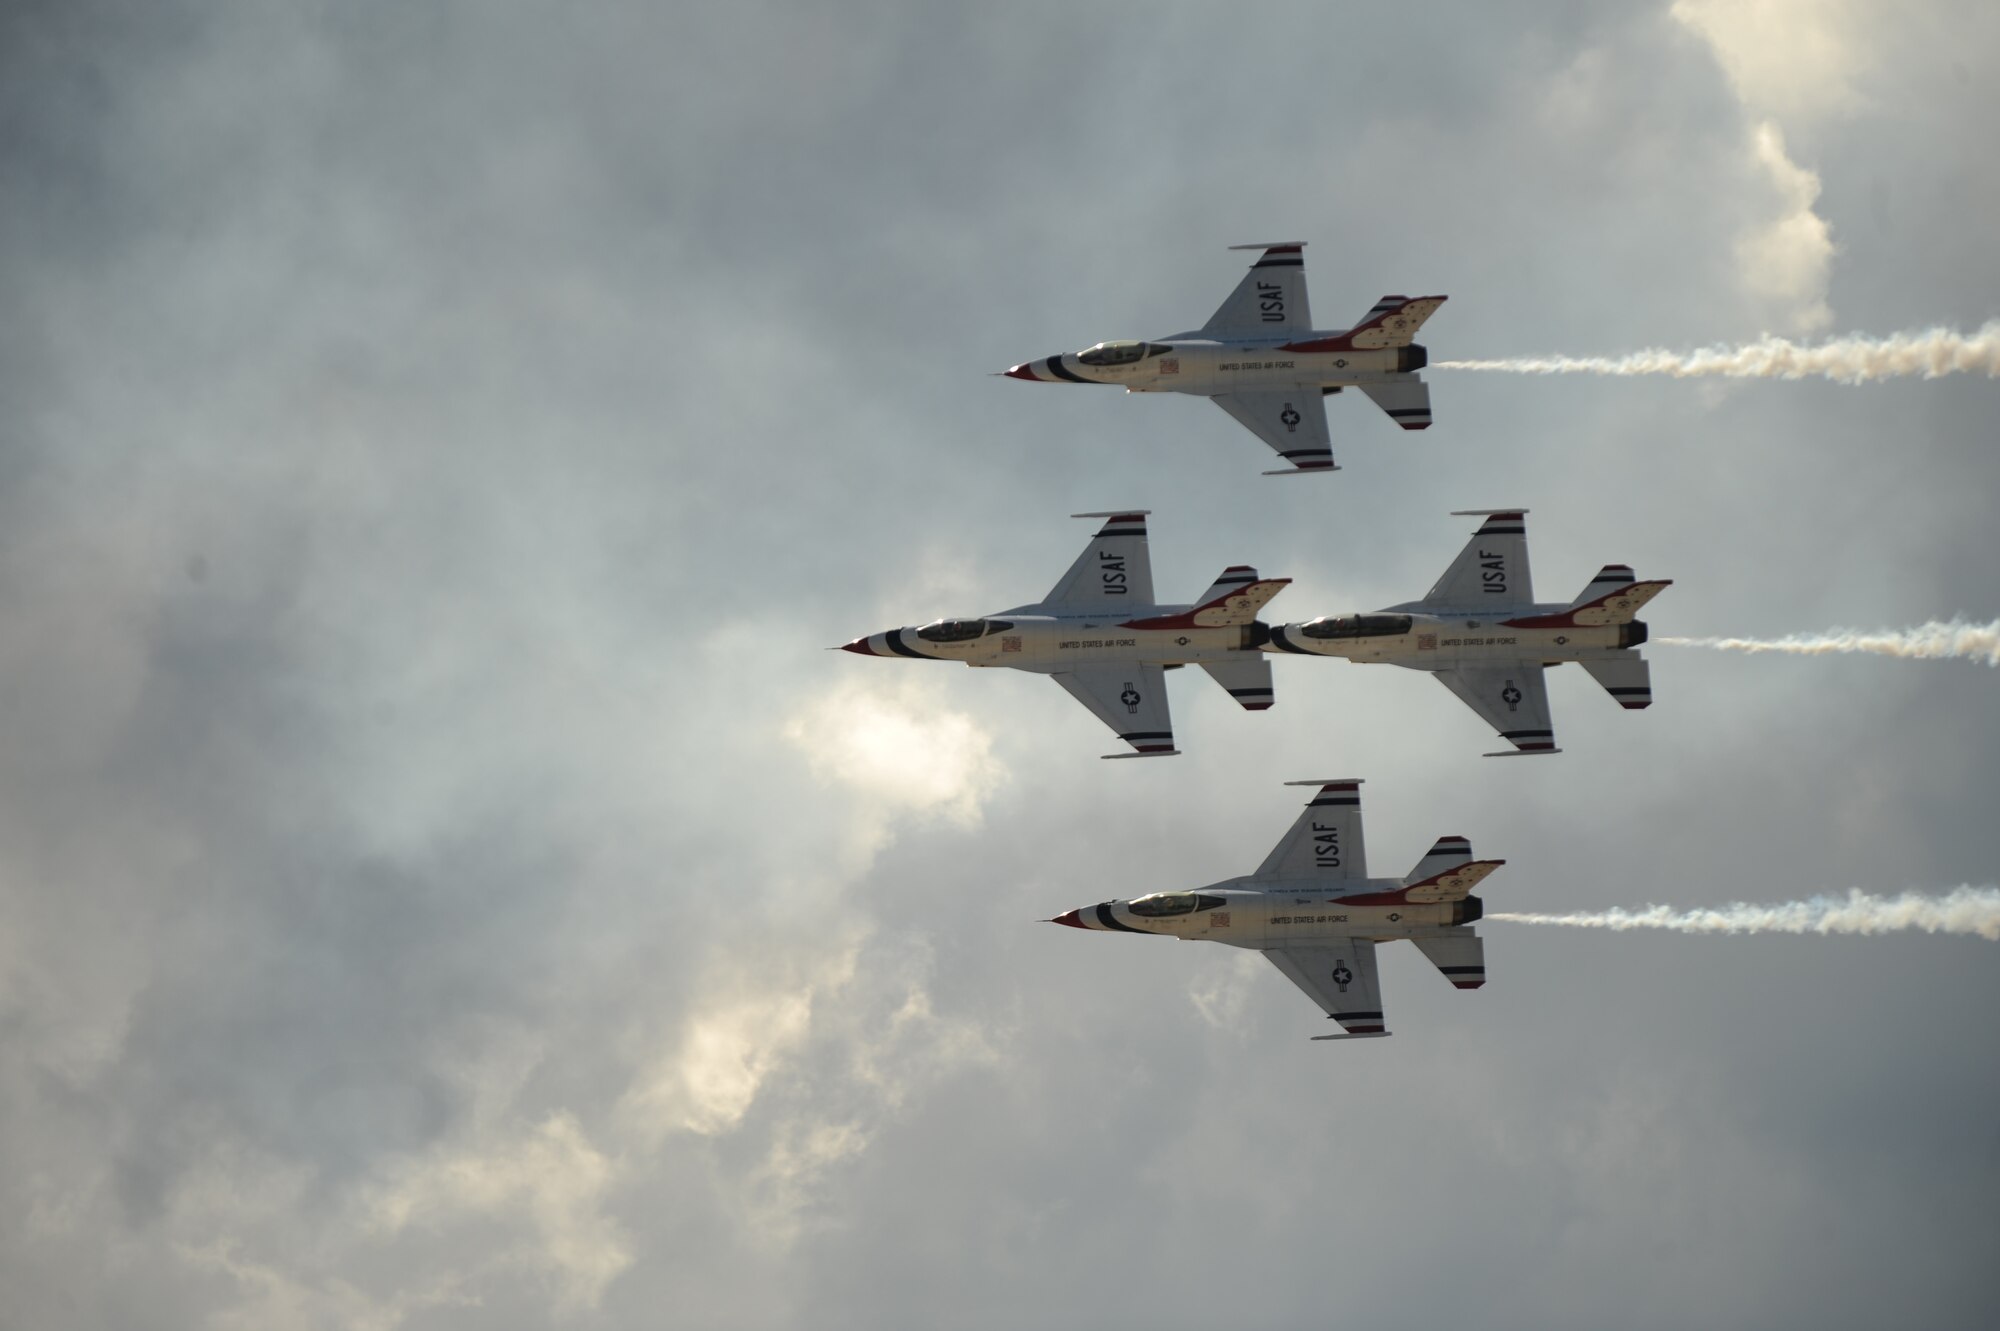 The Thunderbirds fly by in their diamond opener formation during the 2015 Dakota Thunder airshow and open house at Ellsworth Air Force Base S.D., Aug. 15, 2015. Ellsworth held the airshow to show its appreciation to the public for its support of the U.S. military over the years. (U.S. Air Force photo by Airman Sadie Colbert/Released)
